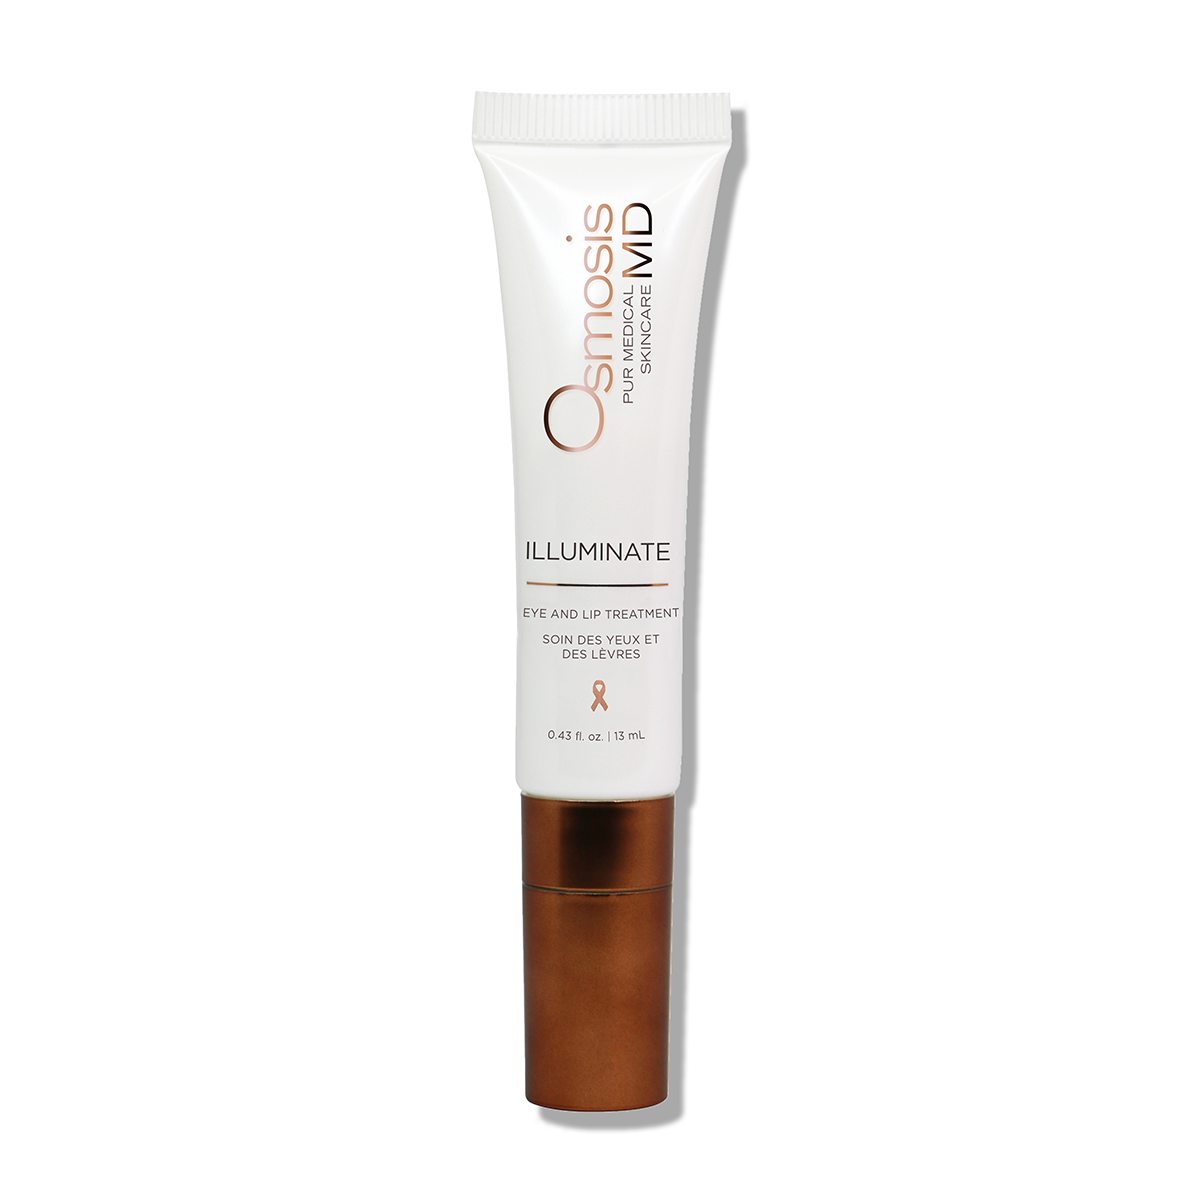 Osmosis MD Illuminate Eye & Lip Treatment: White tube with brown cap, black text label. Diminishes aging signs, improves elasticity, refreshes tired eyes. Key ingredients: CoQ10, Liquid Crystals, Chlorella Vulgaris.